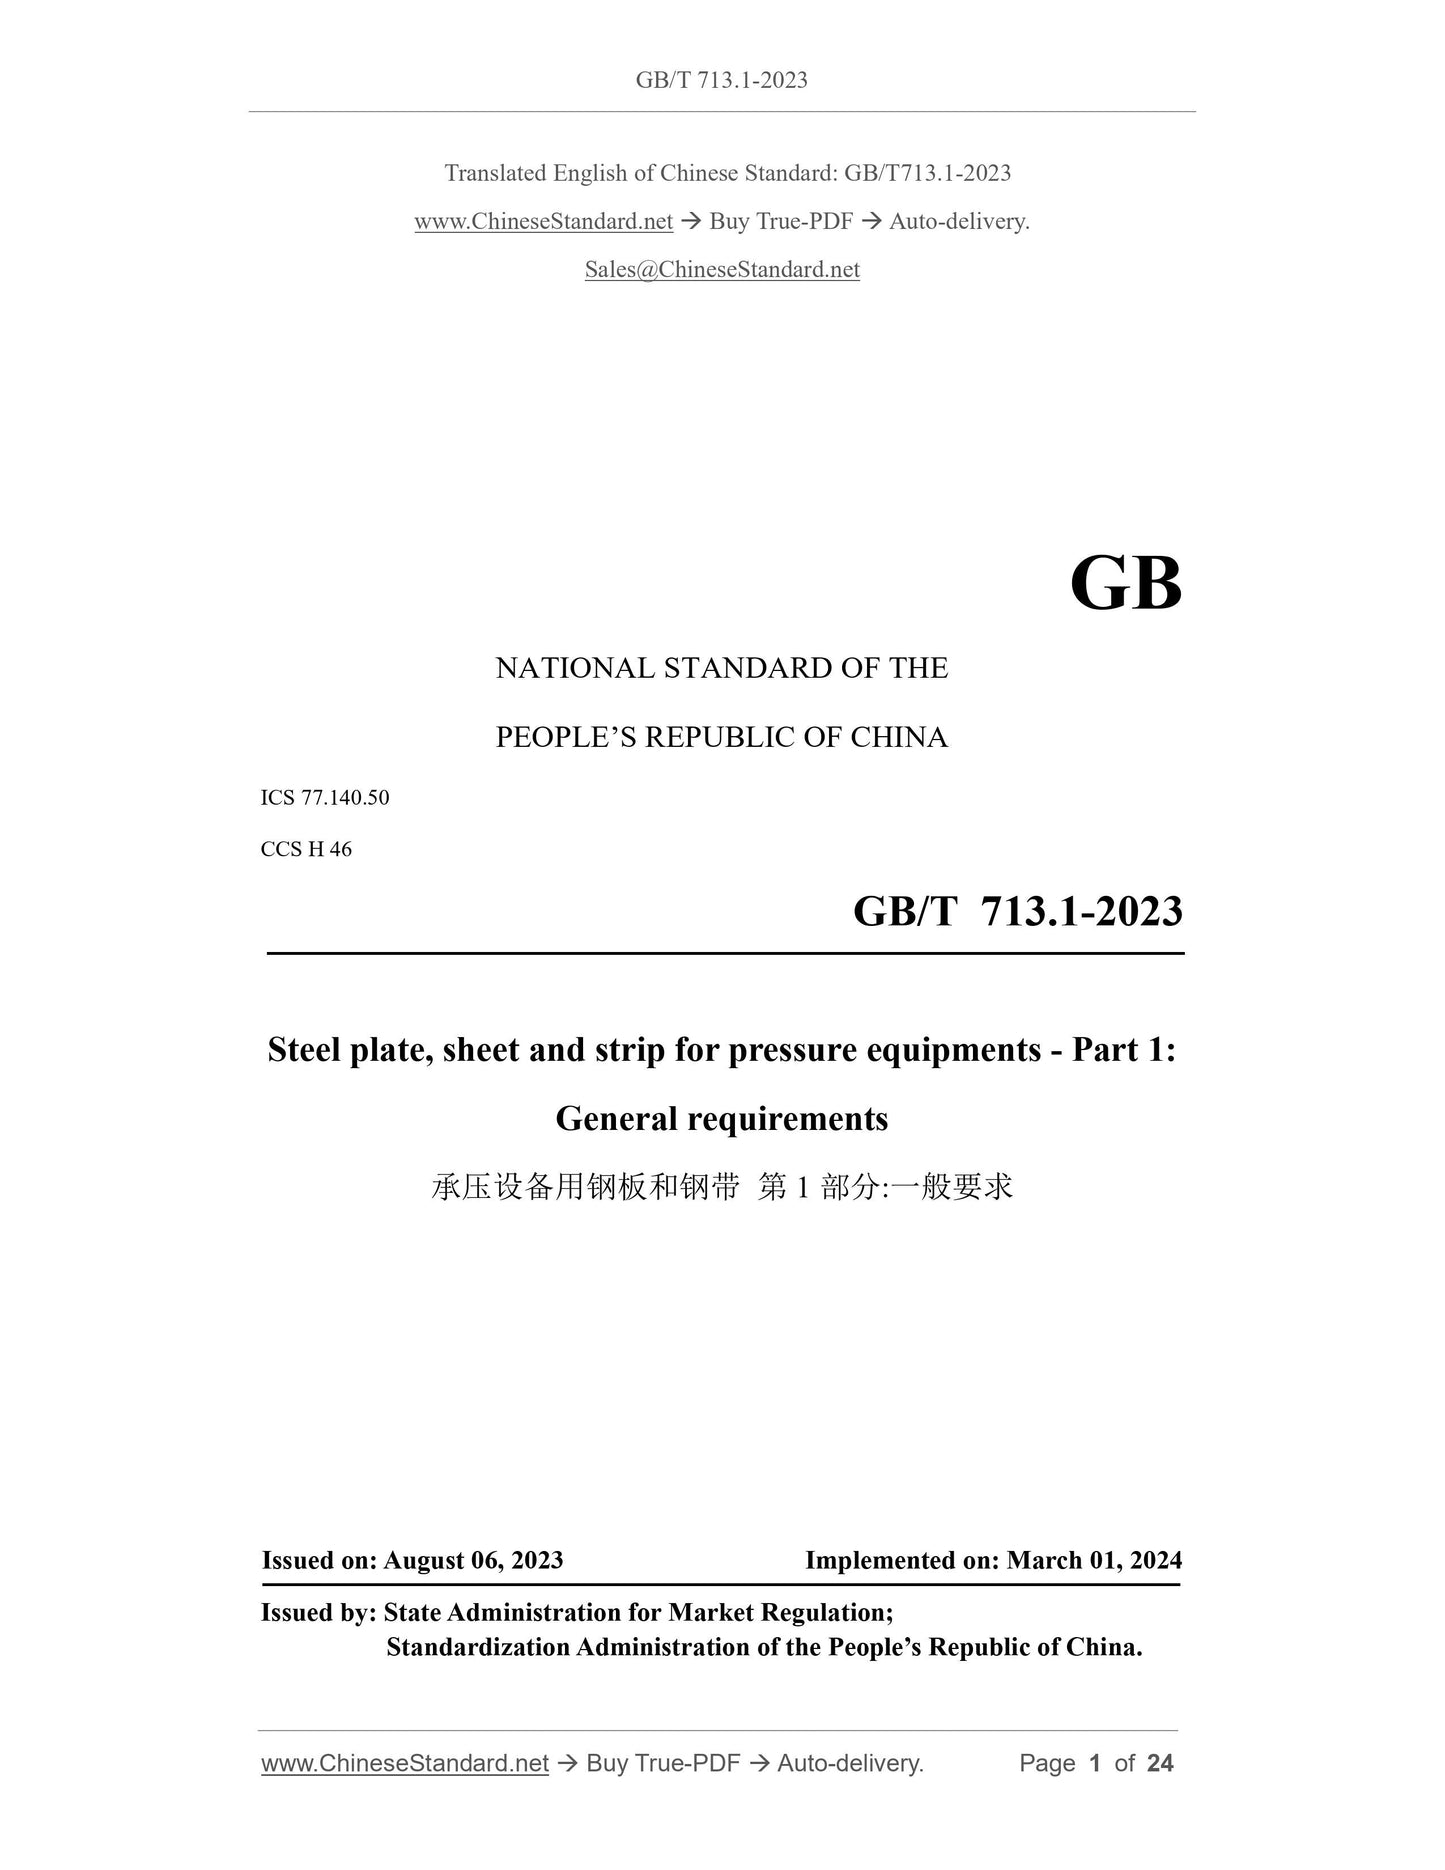 GB/T 713.1-2023 Page 1